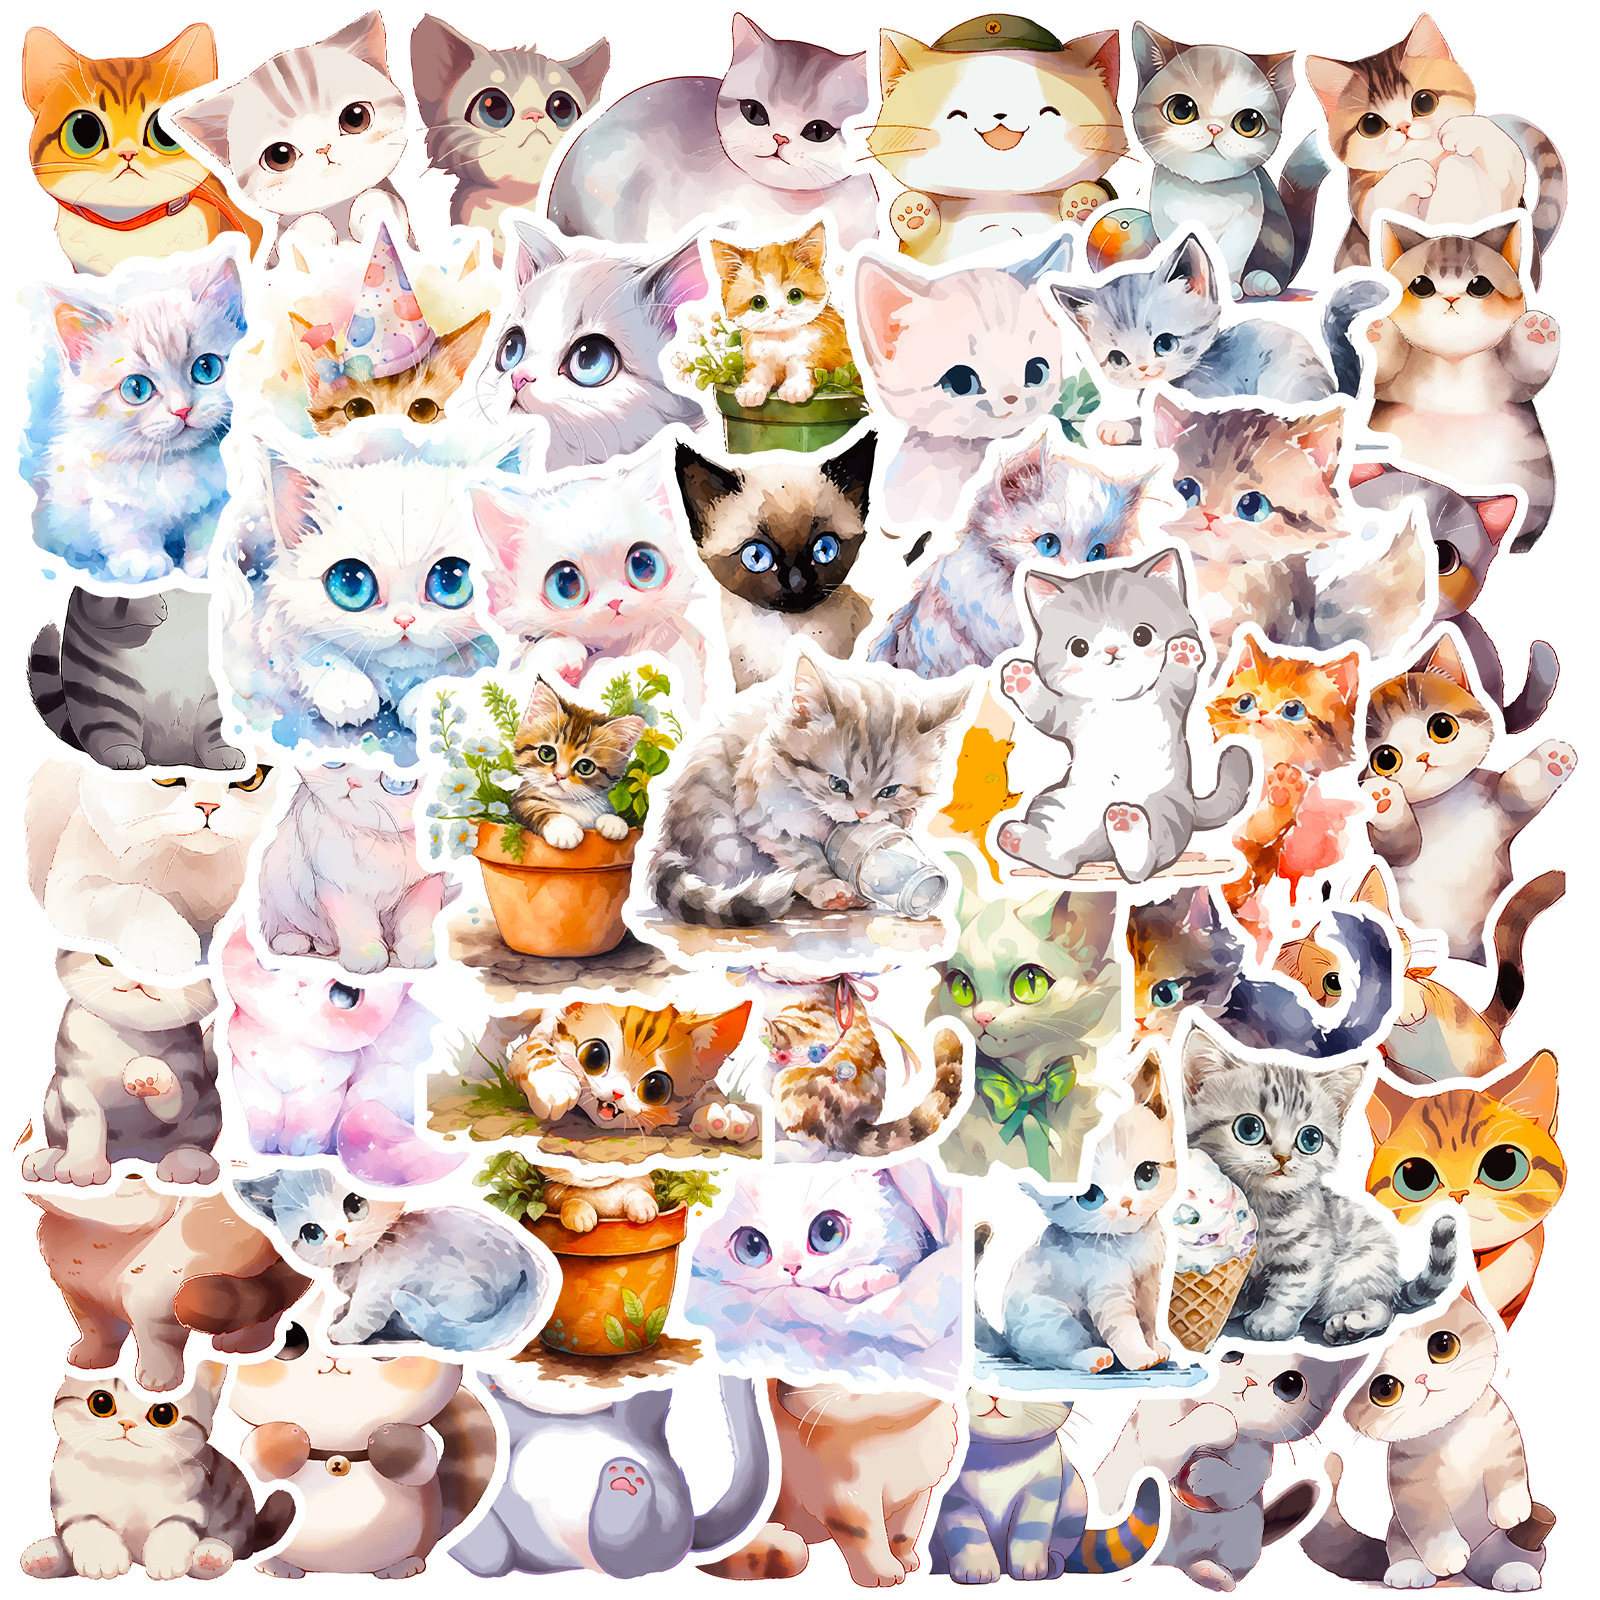 50pcs Evil Eyes Stickers Fashion Fun Waterproof Reusable DIY Room  Decoration Suitable For Mobile Phone Computer Shell Wall Skate Windows  General Purpo